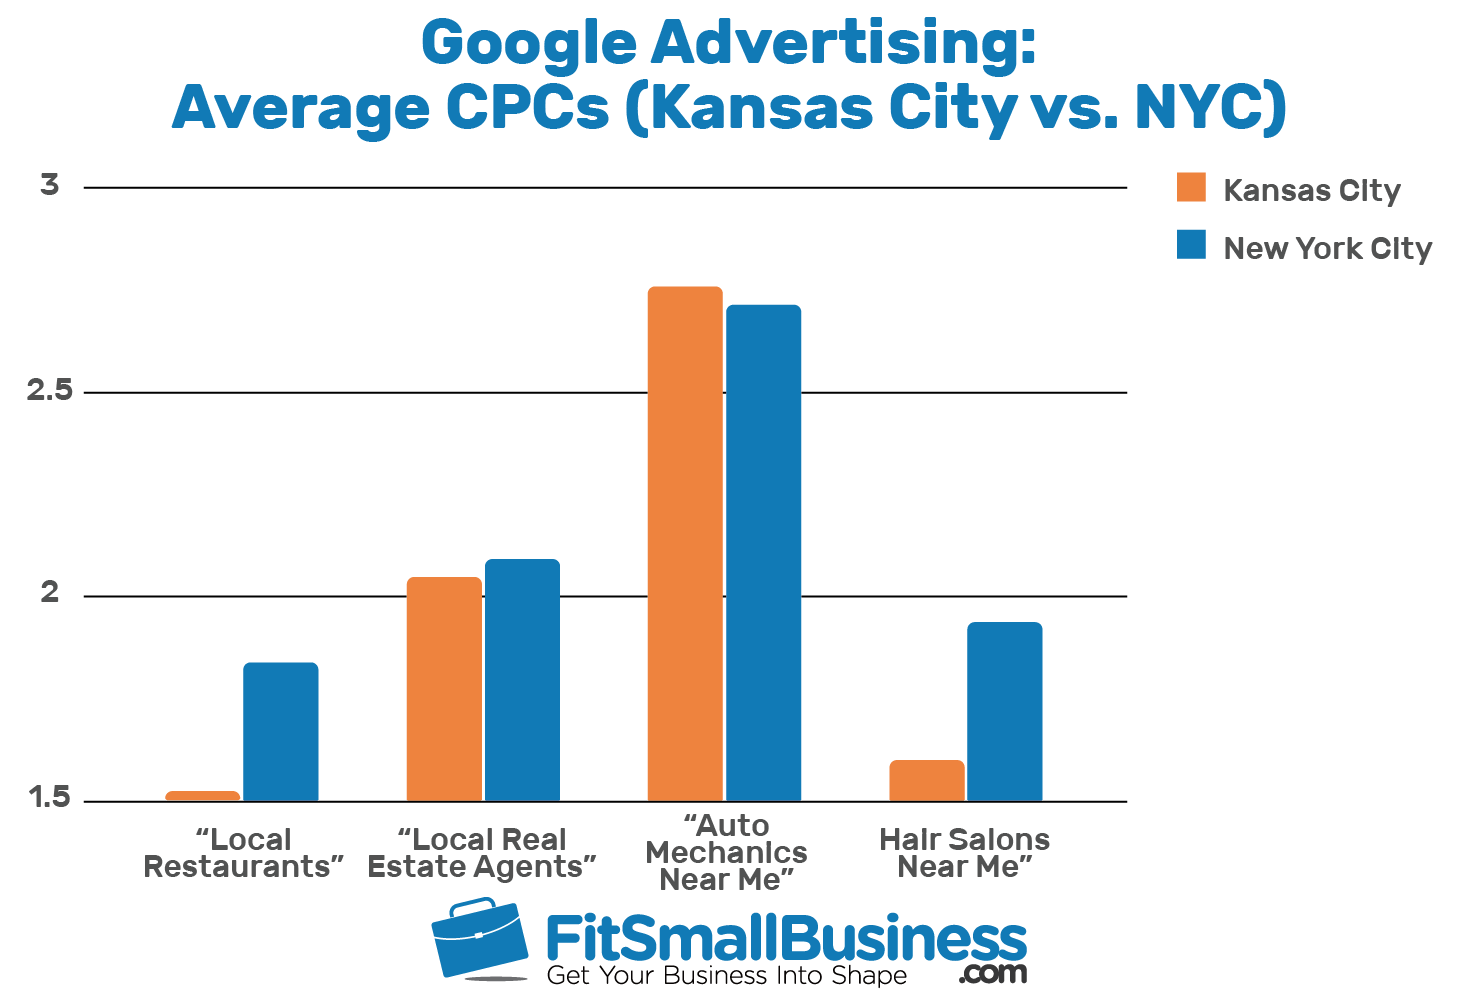 How Much Does Google Advertising Cost?